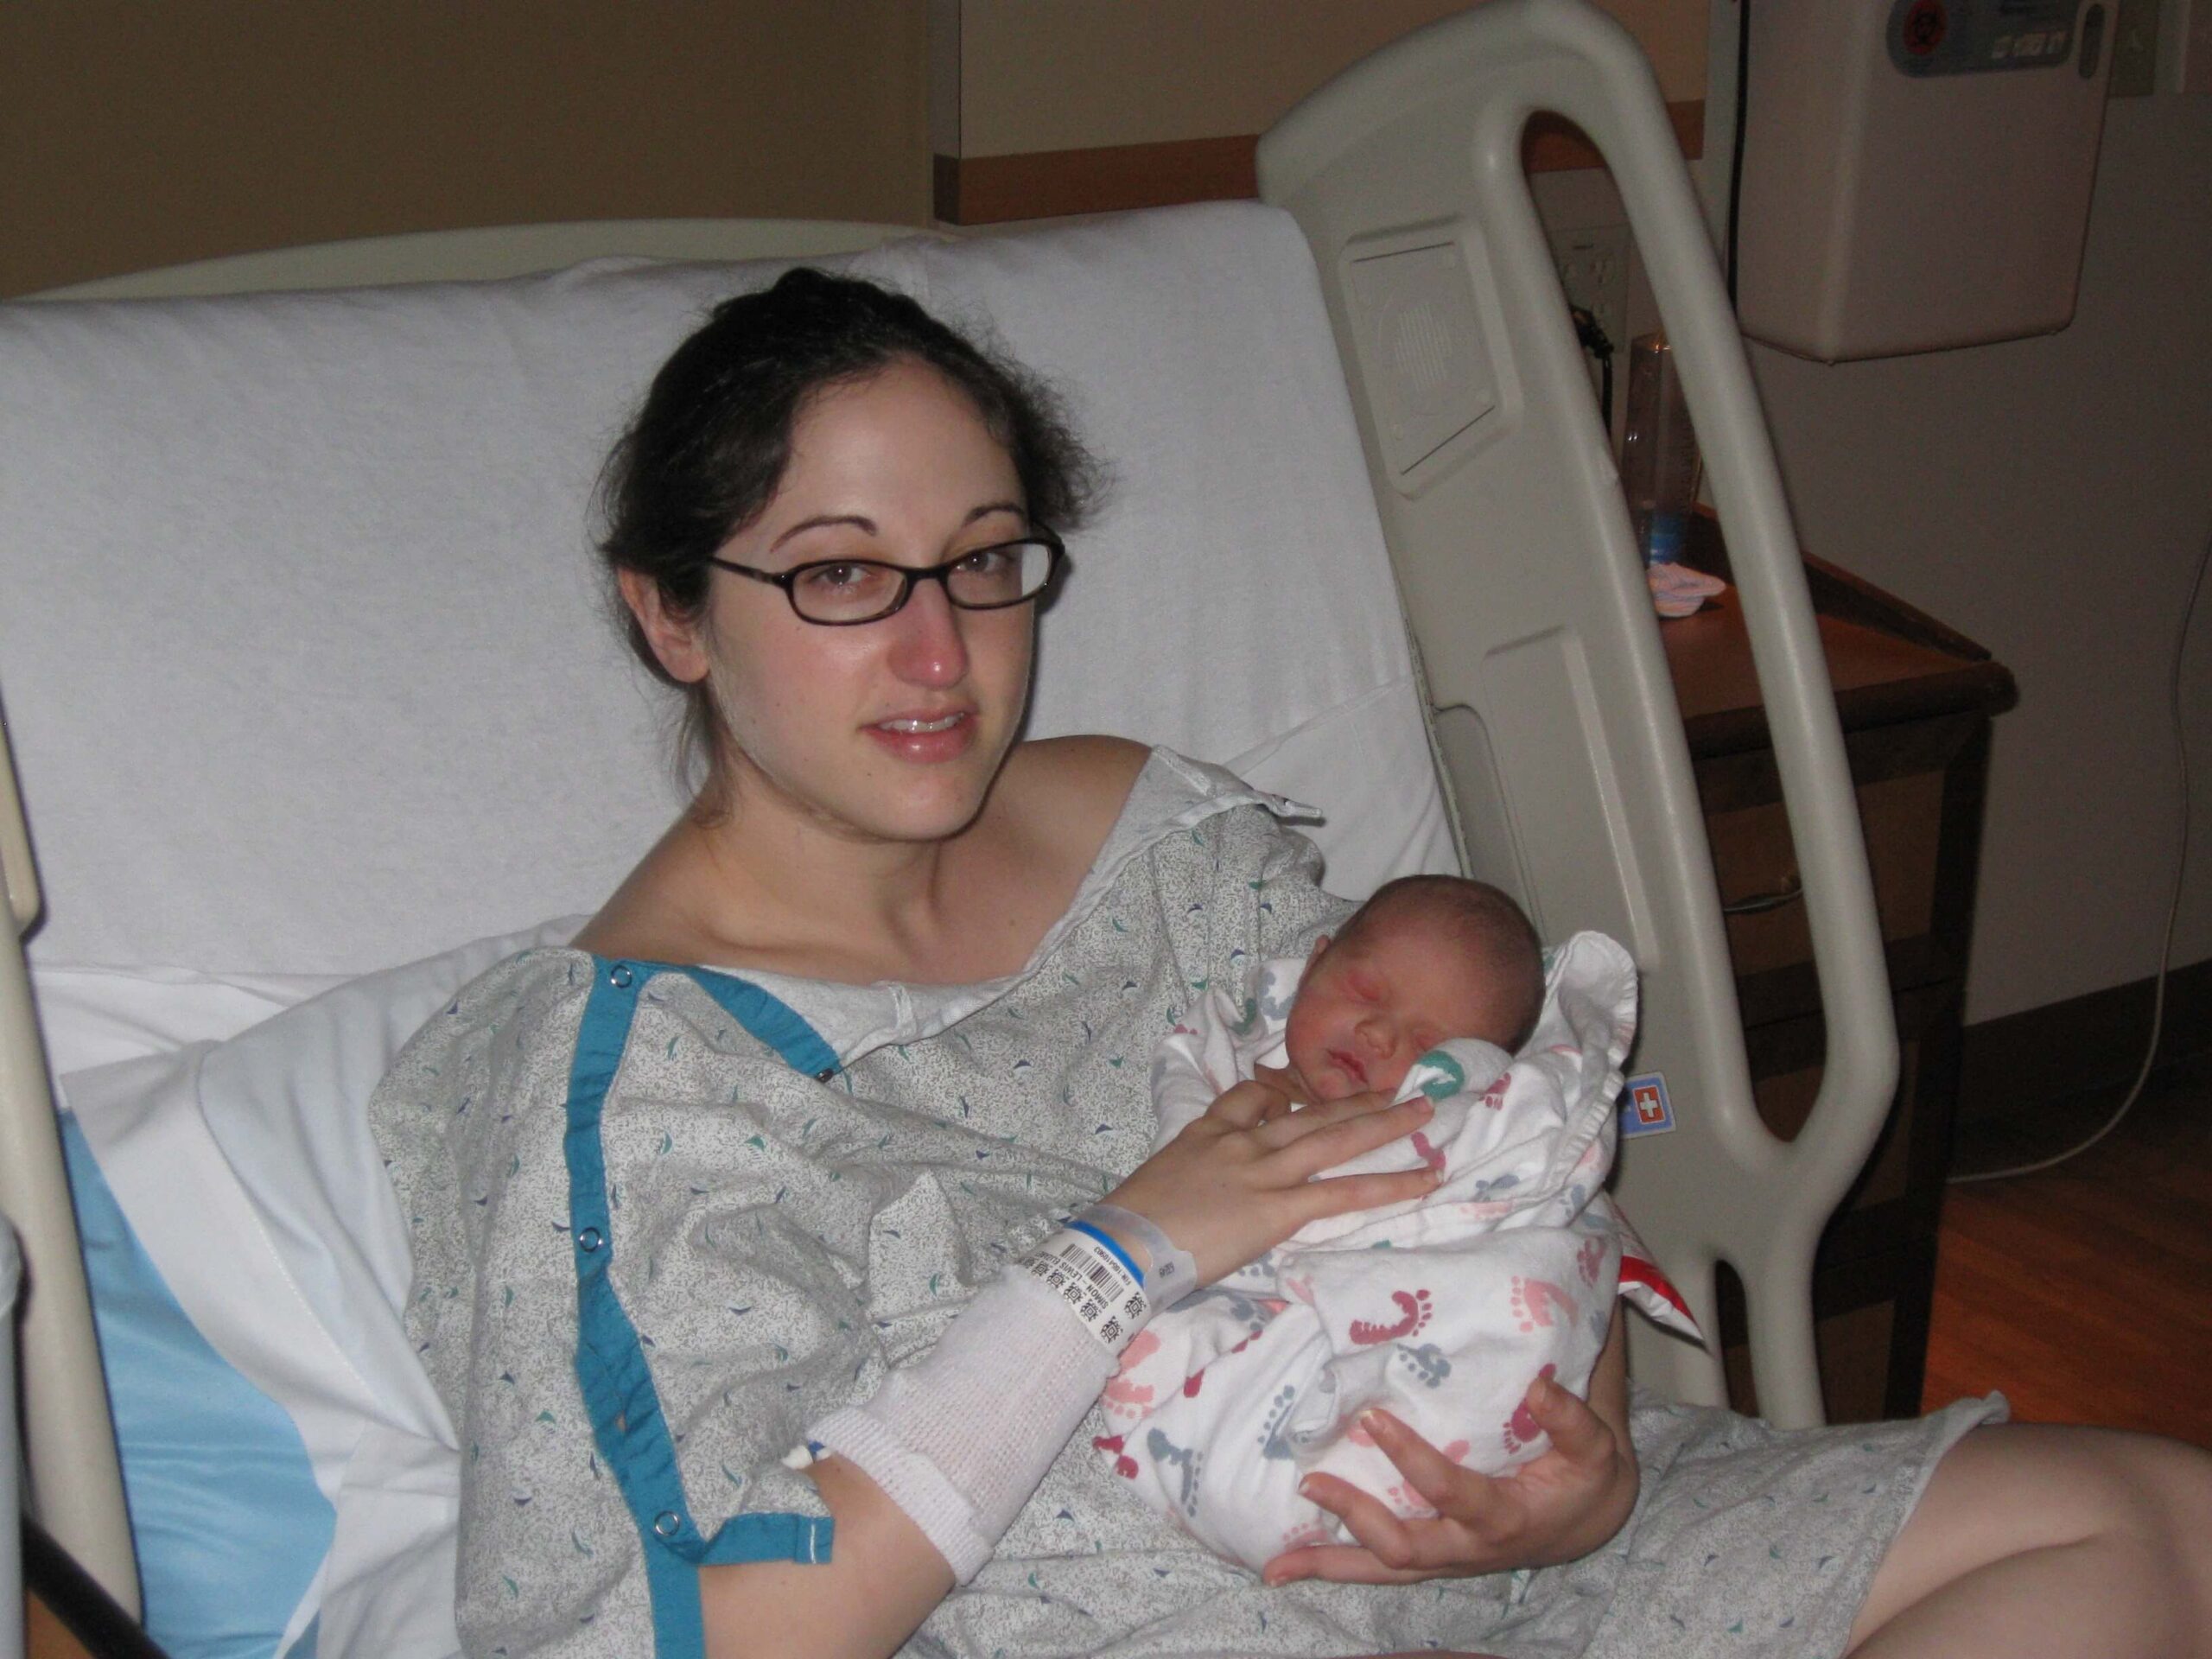 Here I am with my 6.5lb baby. I was definitely not diabetic. I had no idea what I was in for.